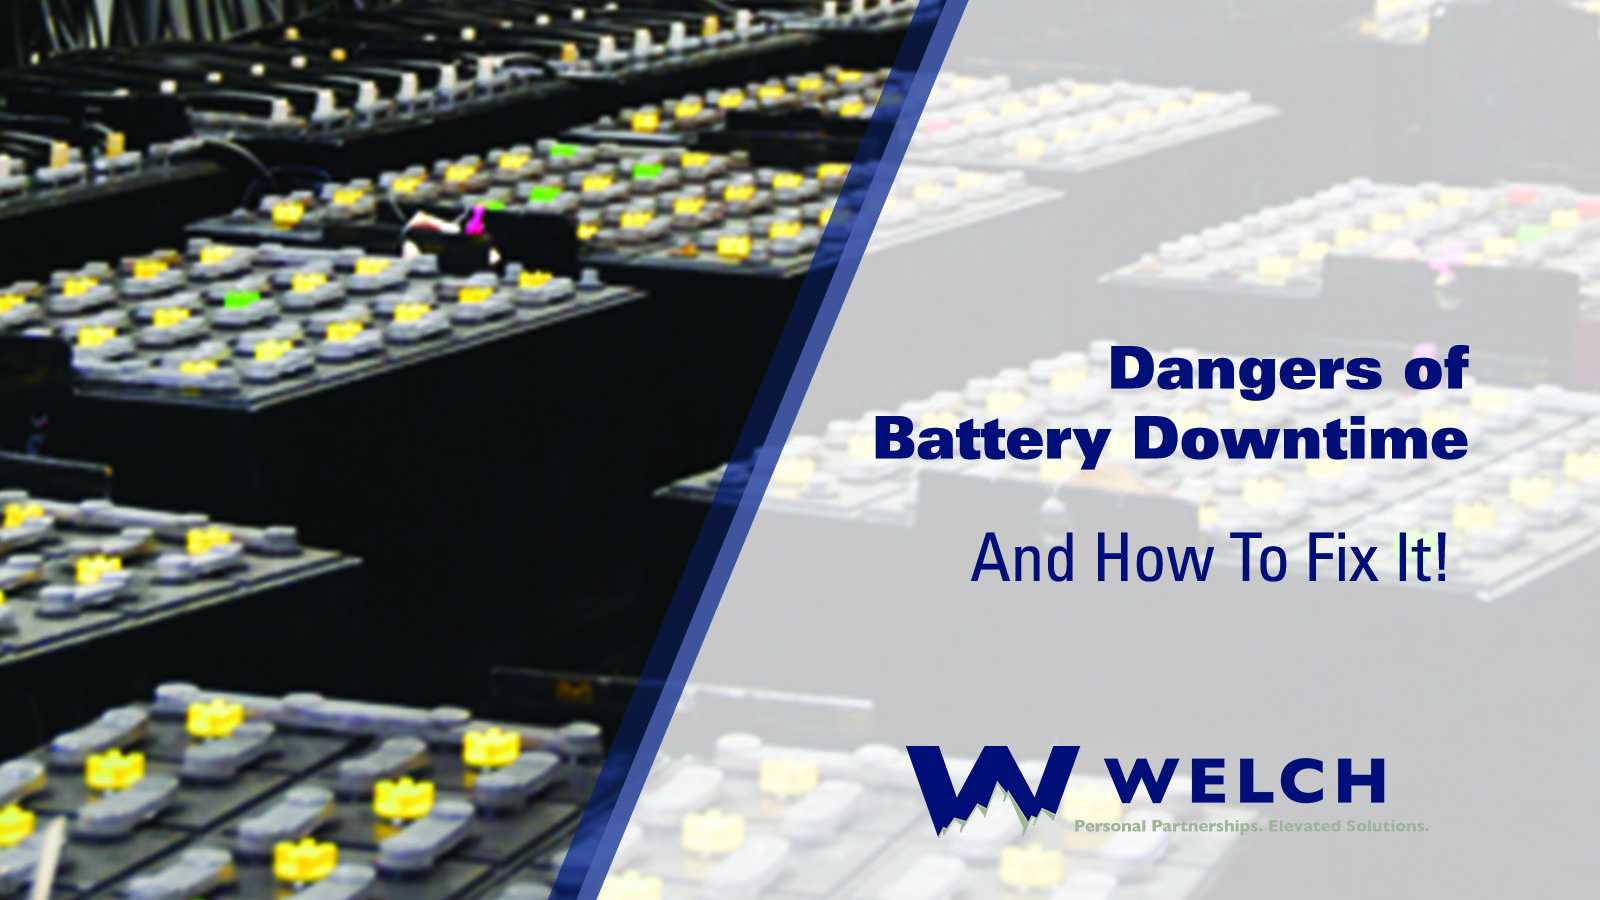 Dangers of Battery Downtime (And How to Fix It!) 5